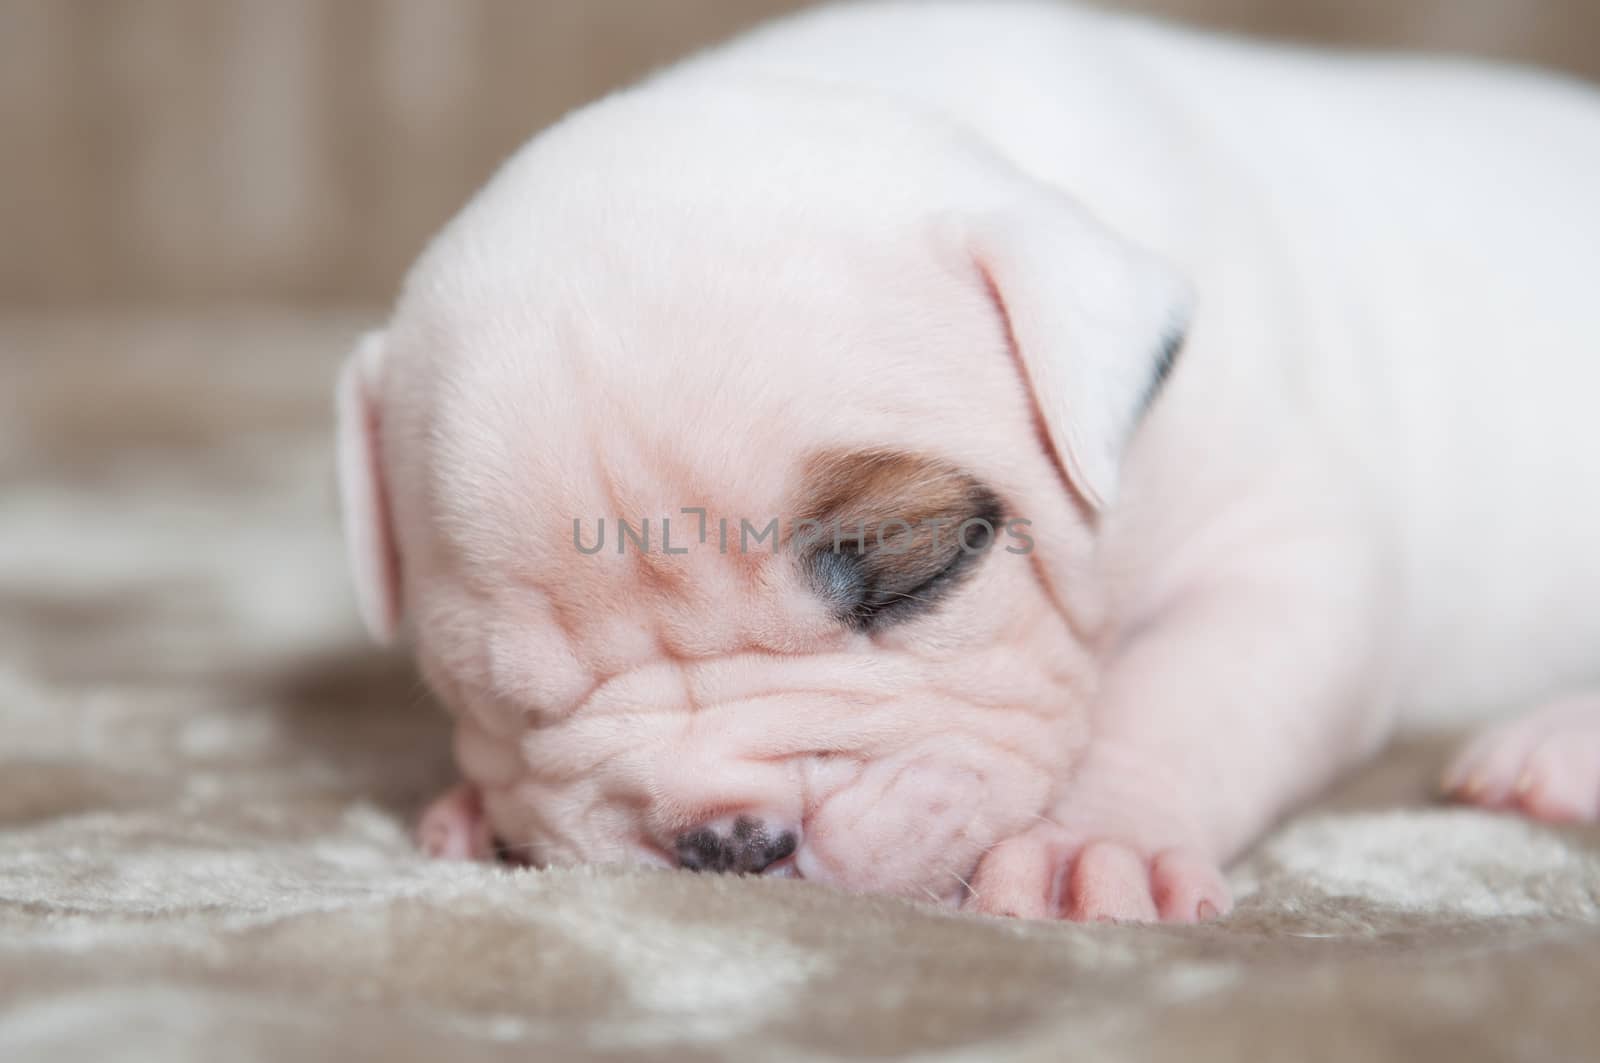 Funny small American Bulldog puppy dog on light background. The puppy is sleeping